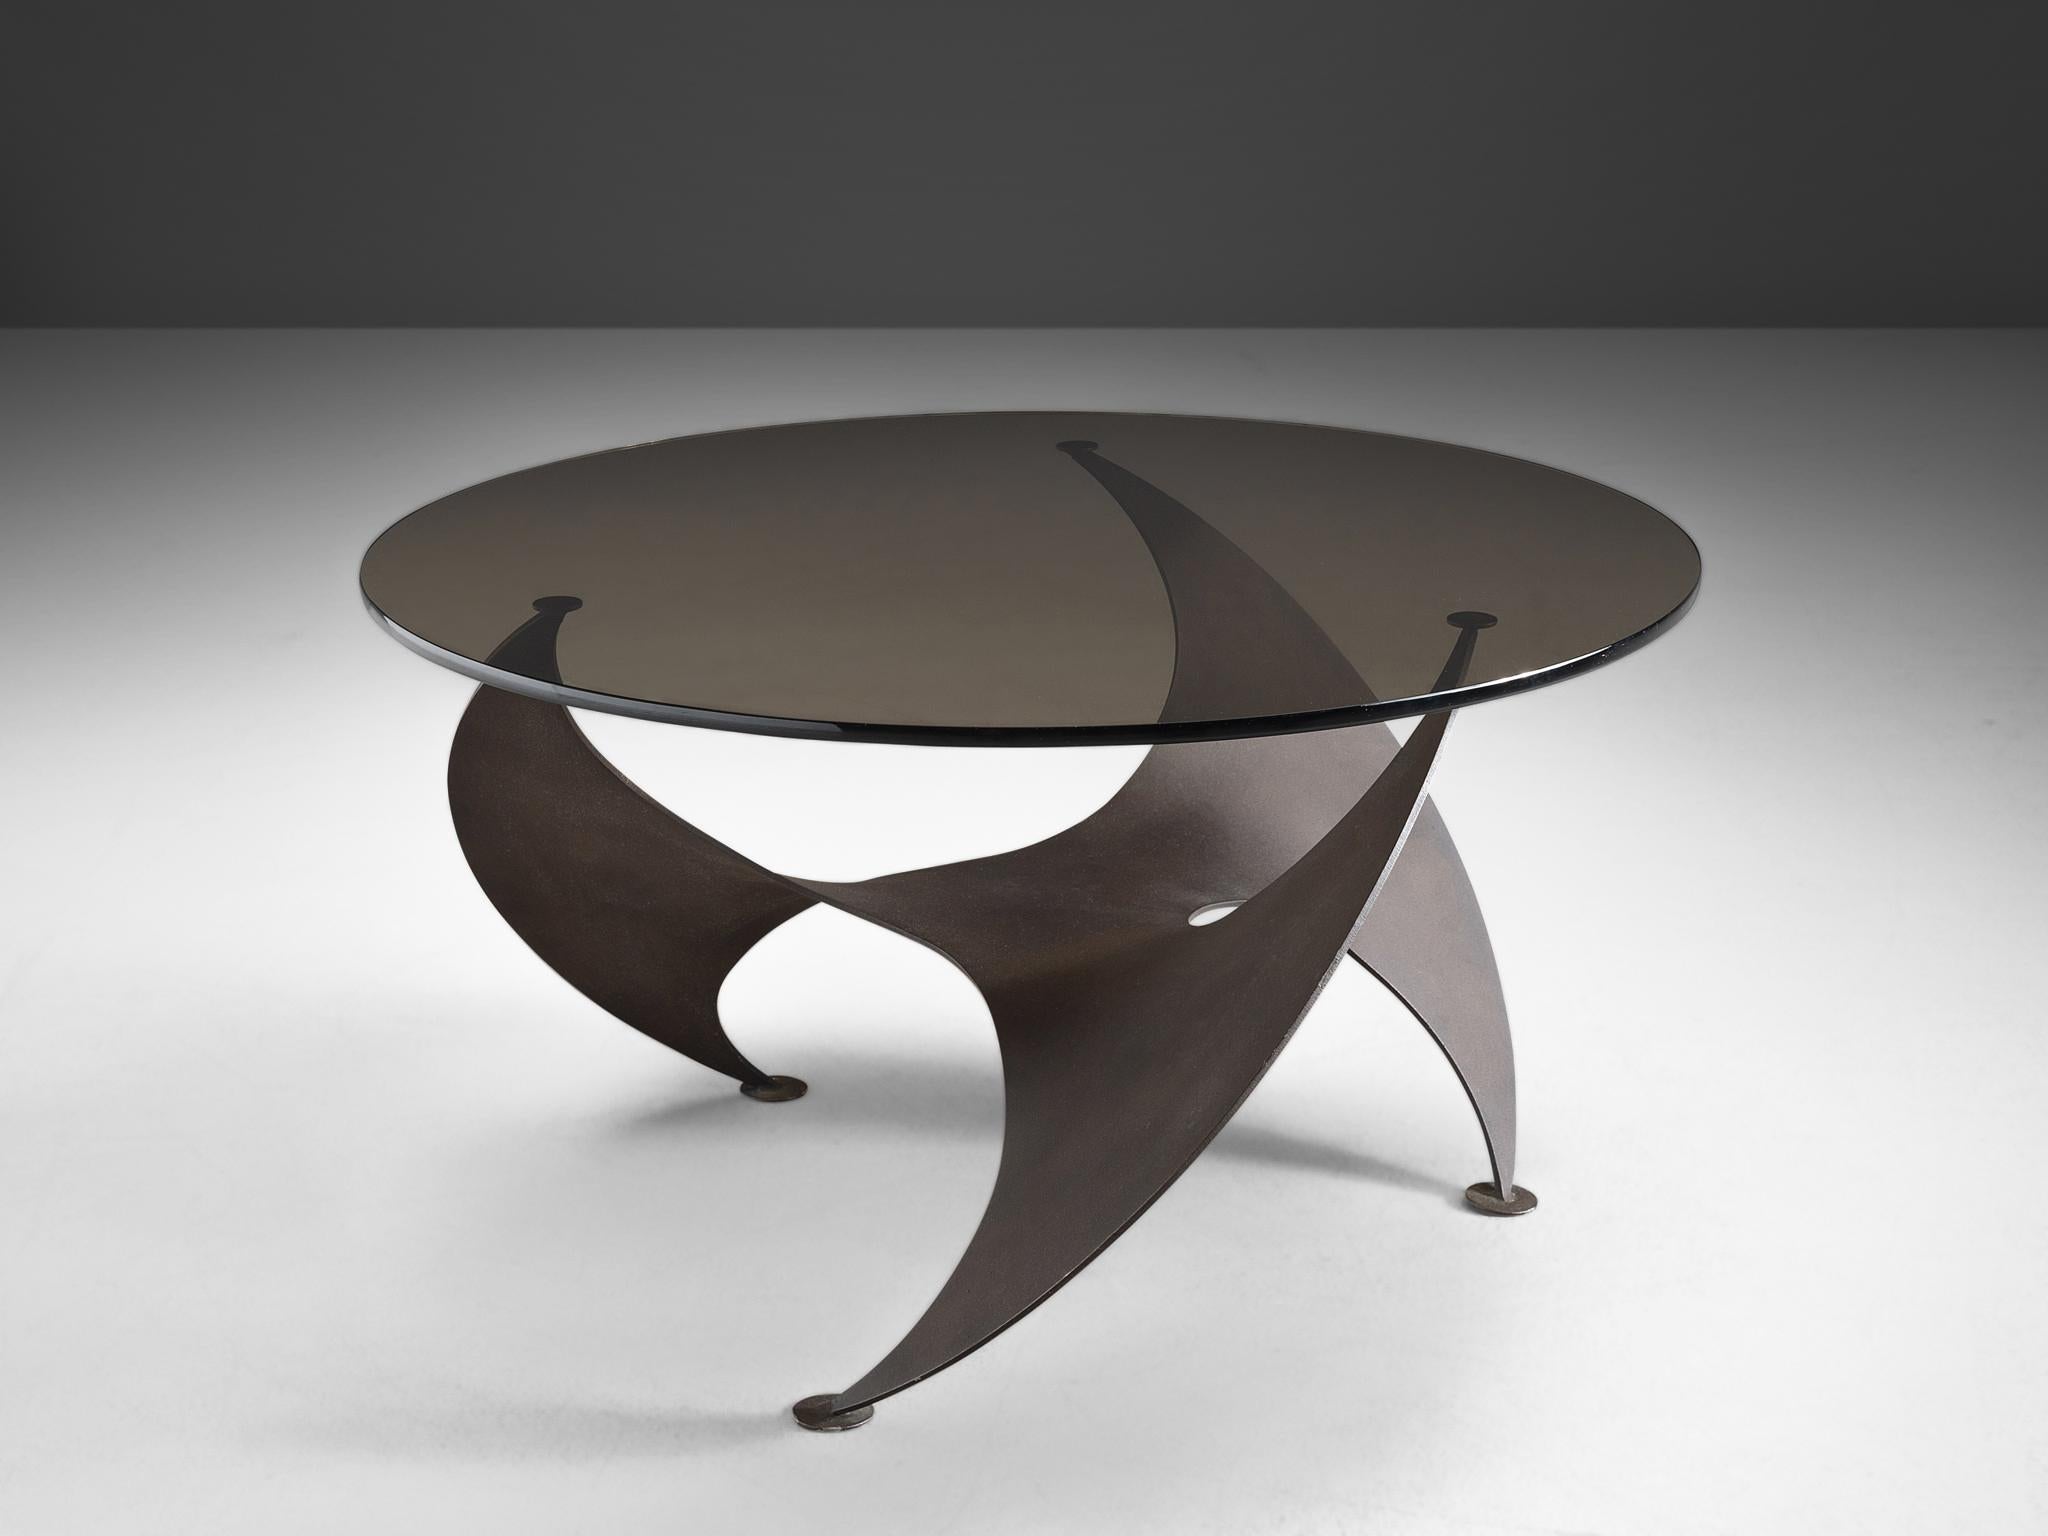 Knut Hesterberg, coffee table, bronzed metal, glass, Germany, 1965

As the name ‘Propeller’ already predicts this coffee table by Knut Hesterberg features a base that looks like the movement of a propeller. The three legs are shaped in a way that